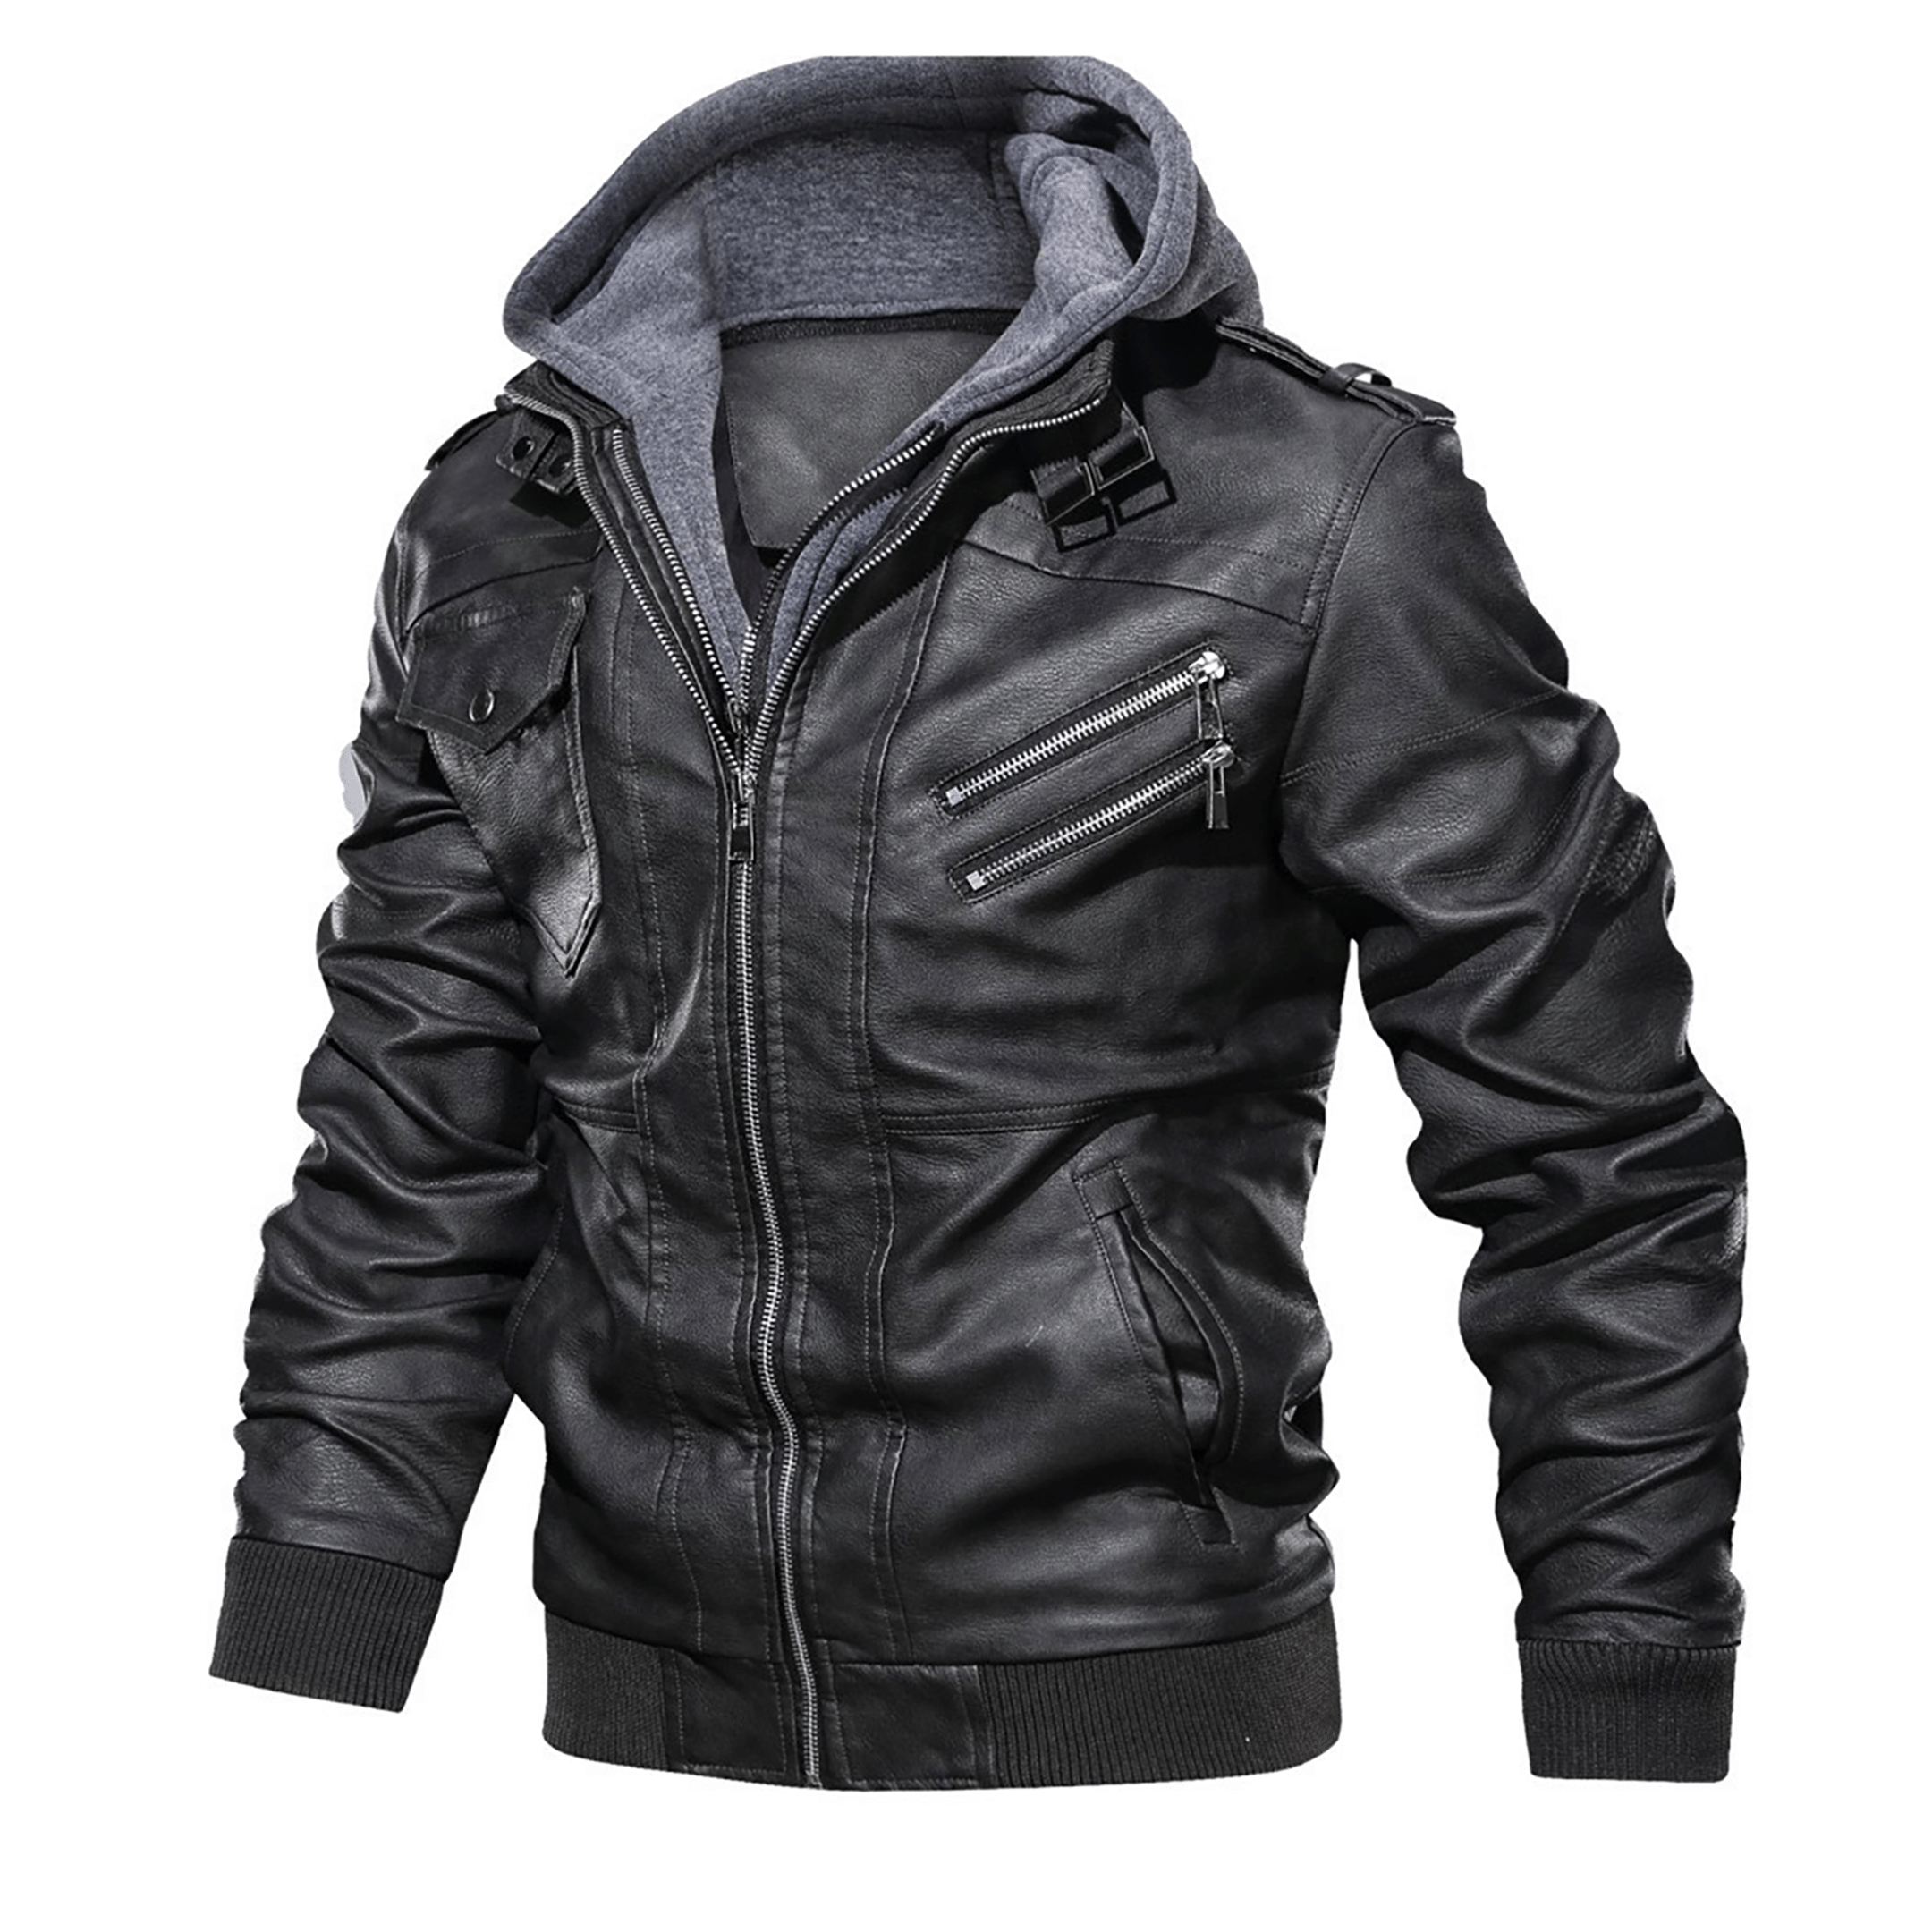 Top leather jackets and latest products 295